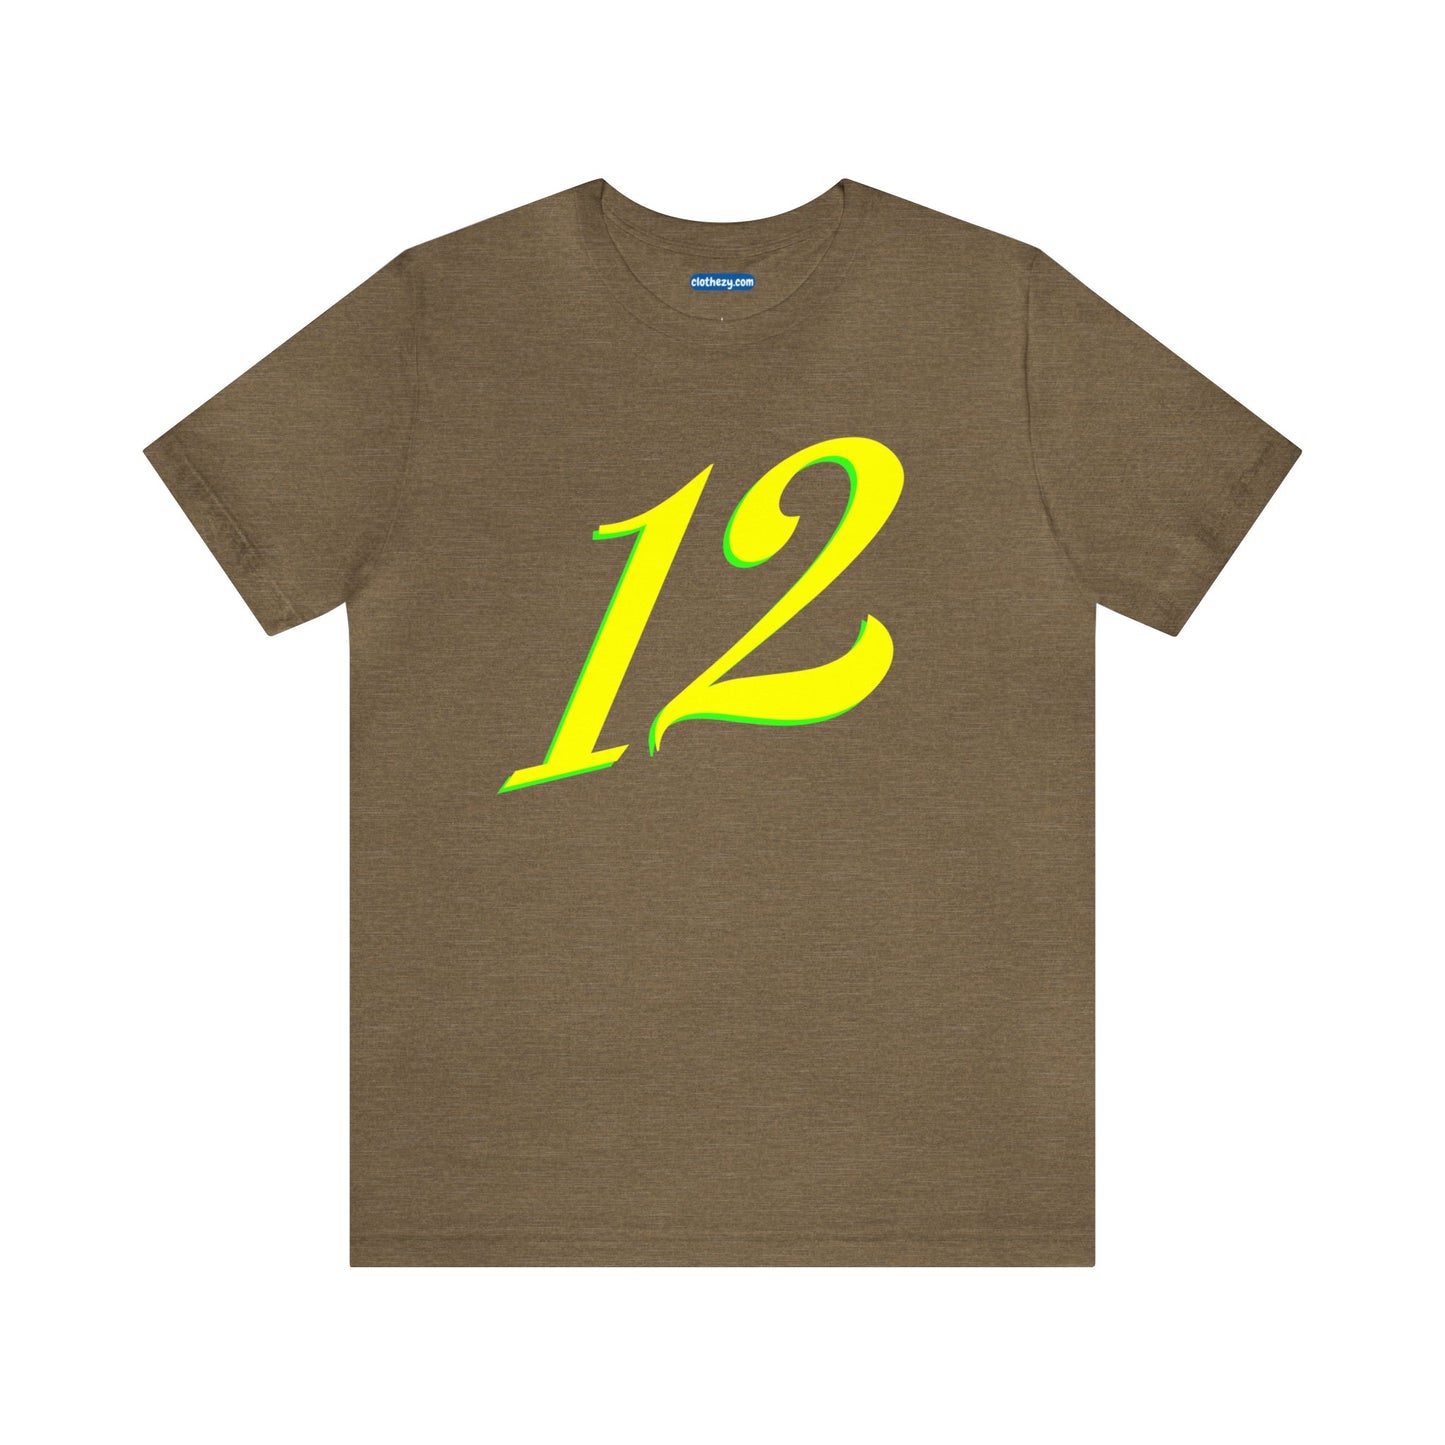 Number 12 Design - Soft Cotton Tee for birthdays and celebrations, Gift for friends and family, Multiple Options by clothezy.com in Olive Heather Size Small - Buy Now